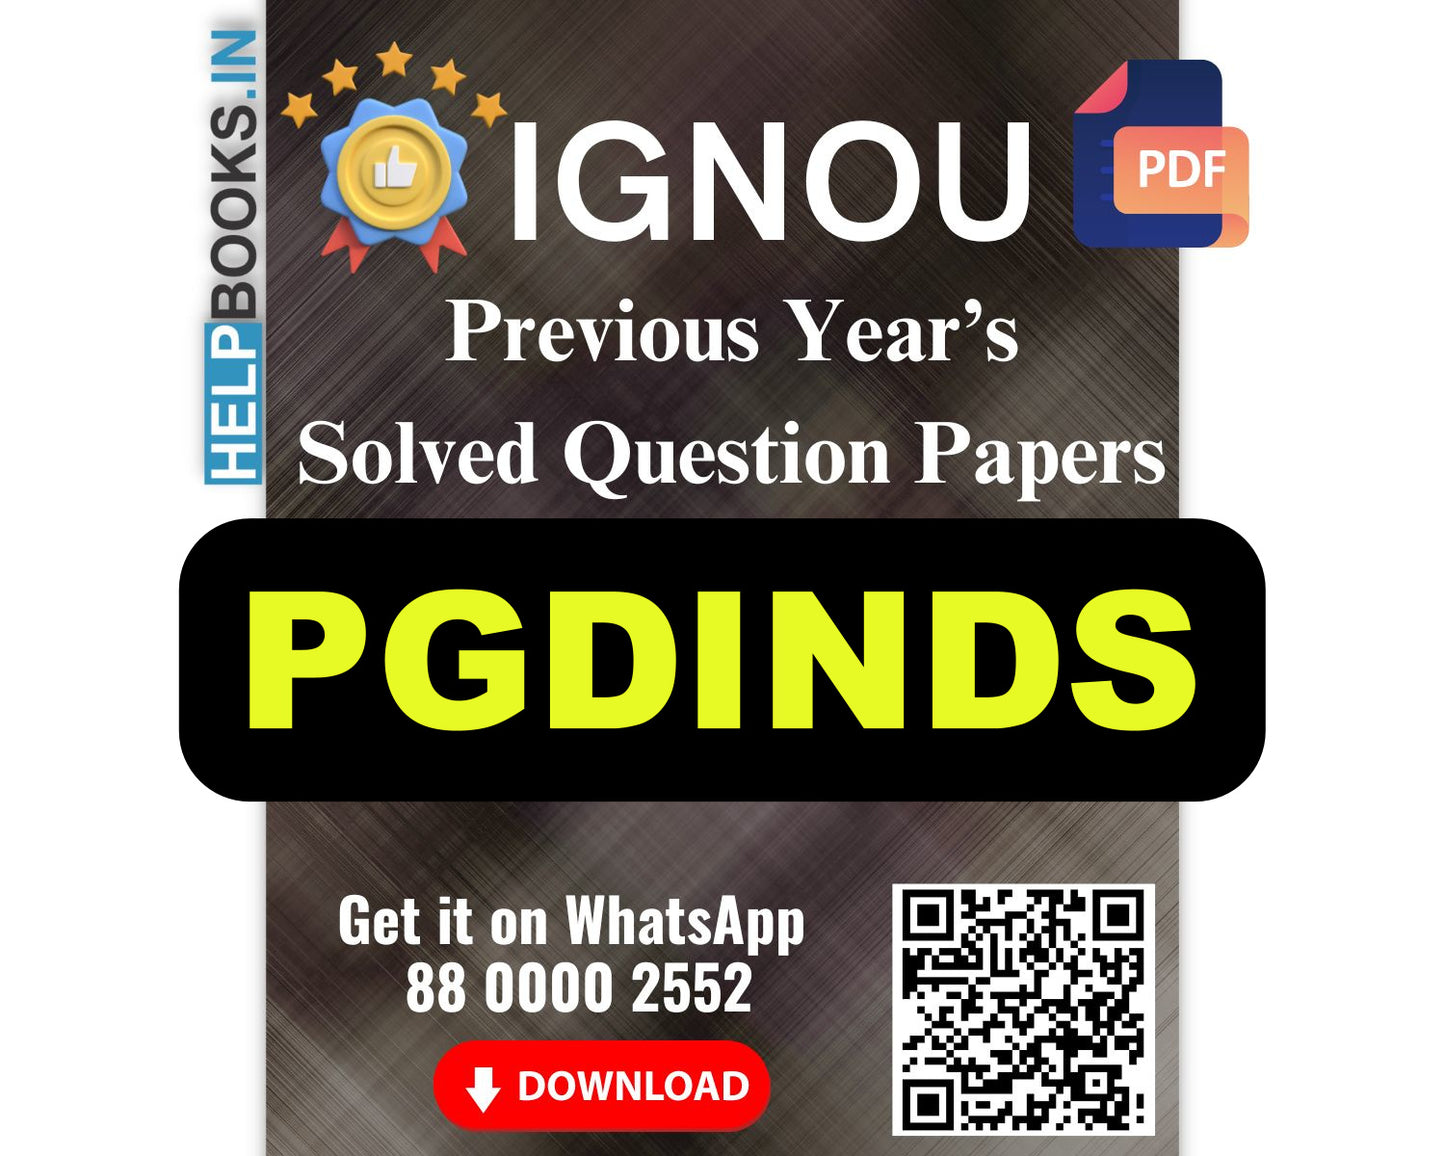 IGNOU PG Diploma in Industrial Safety-PGDINDS Previous Years Solved Papers